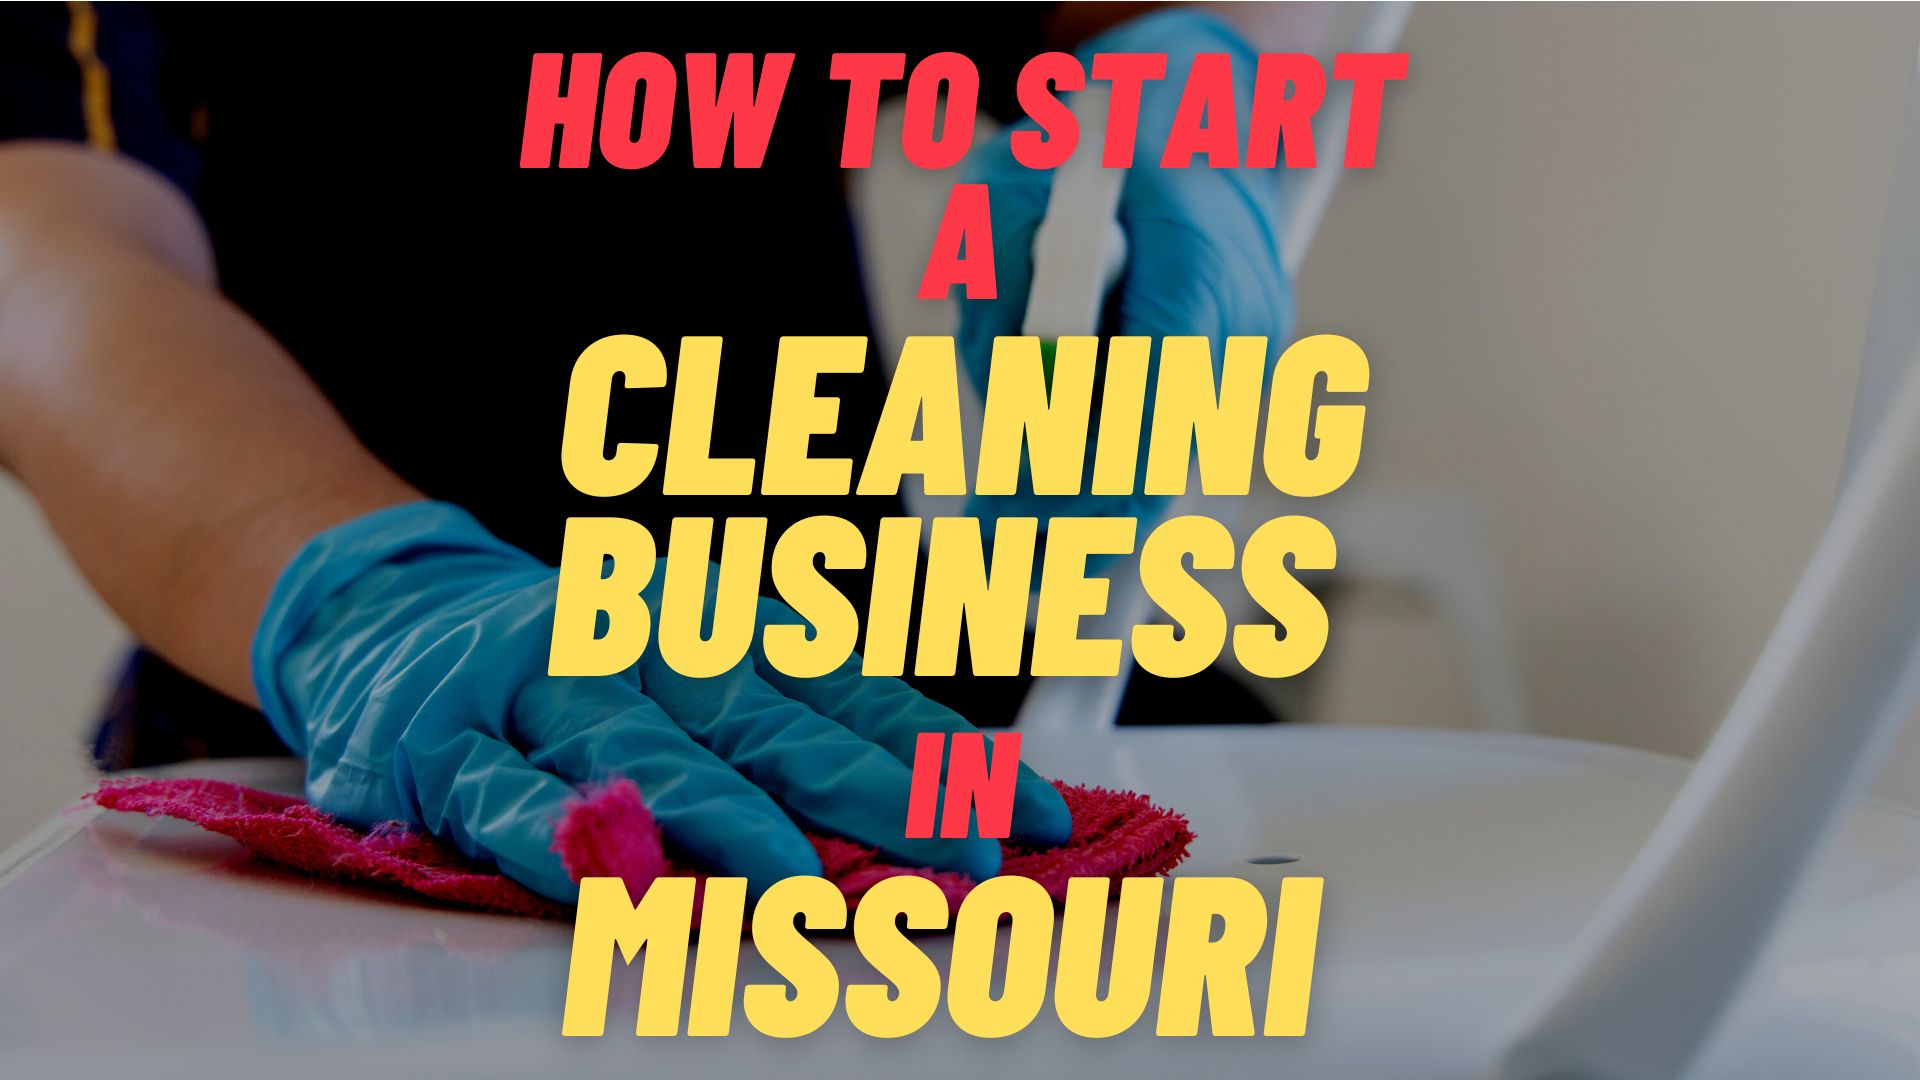 start a cleaning business in Missouri